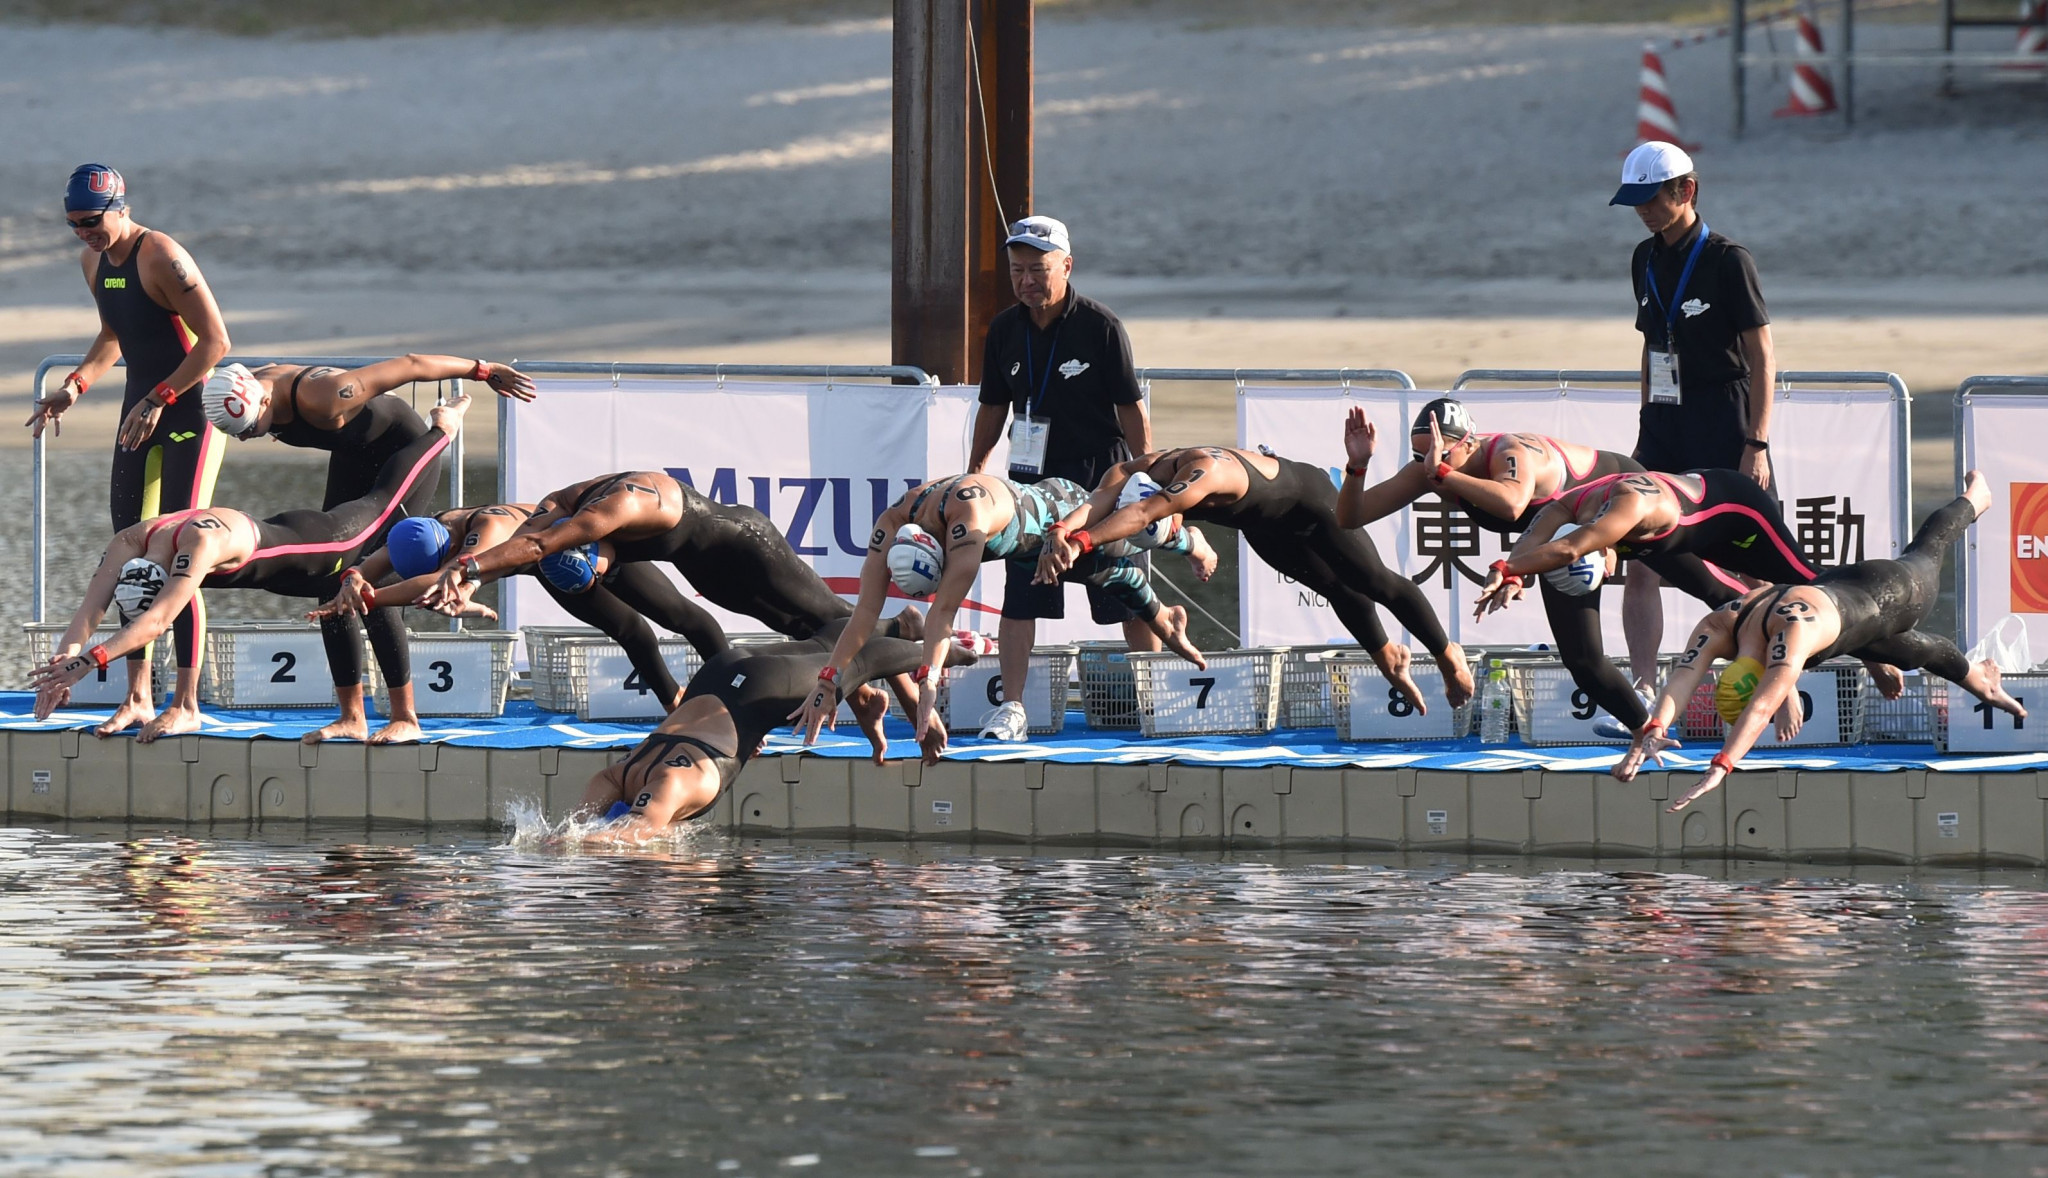 The marathon swim events will take place at the Odaiba Marine Park ©Getty Images